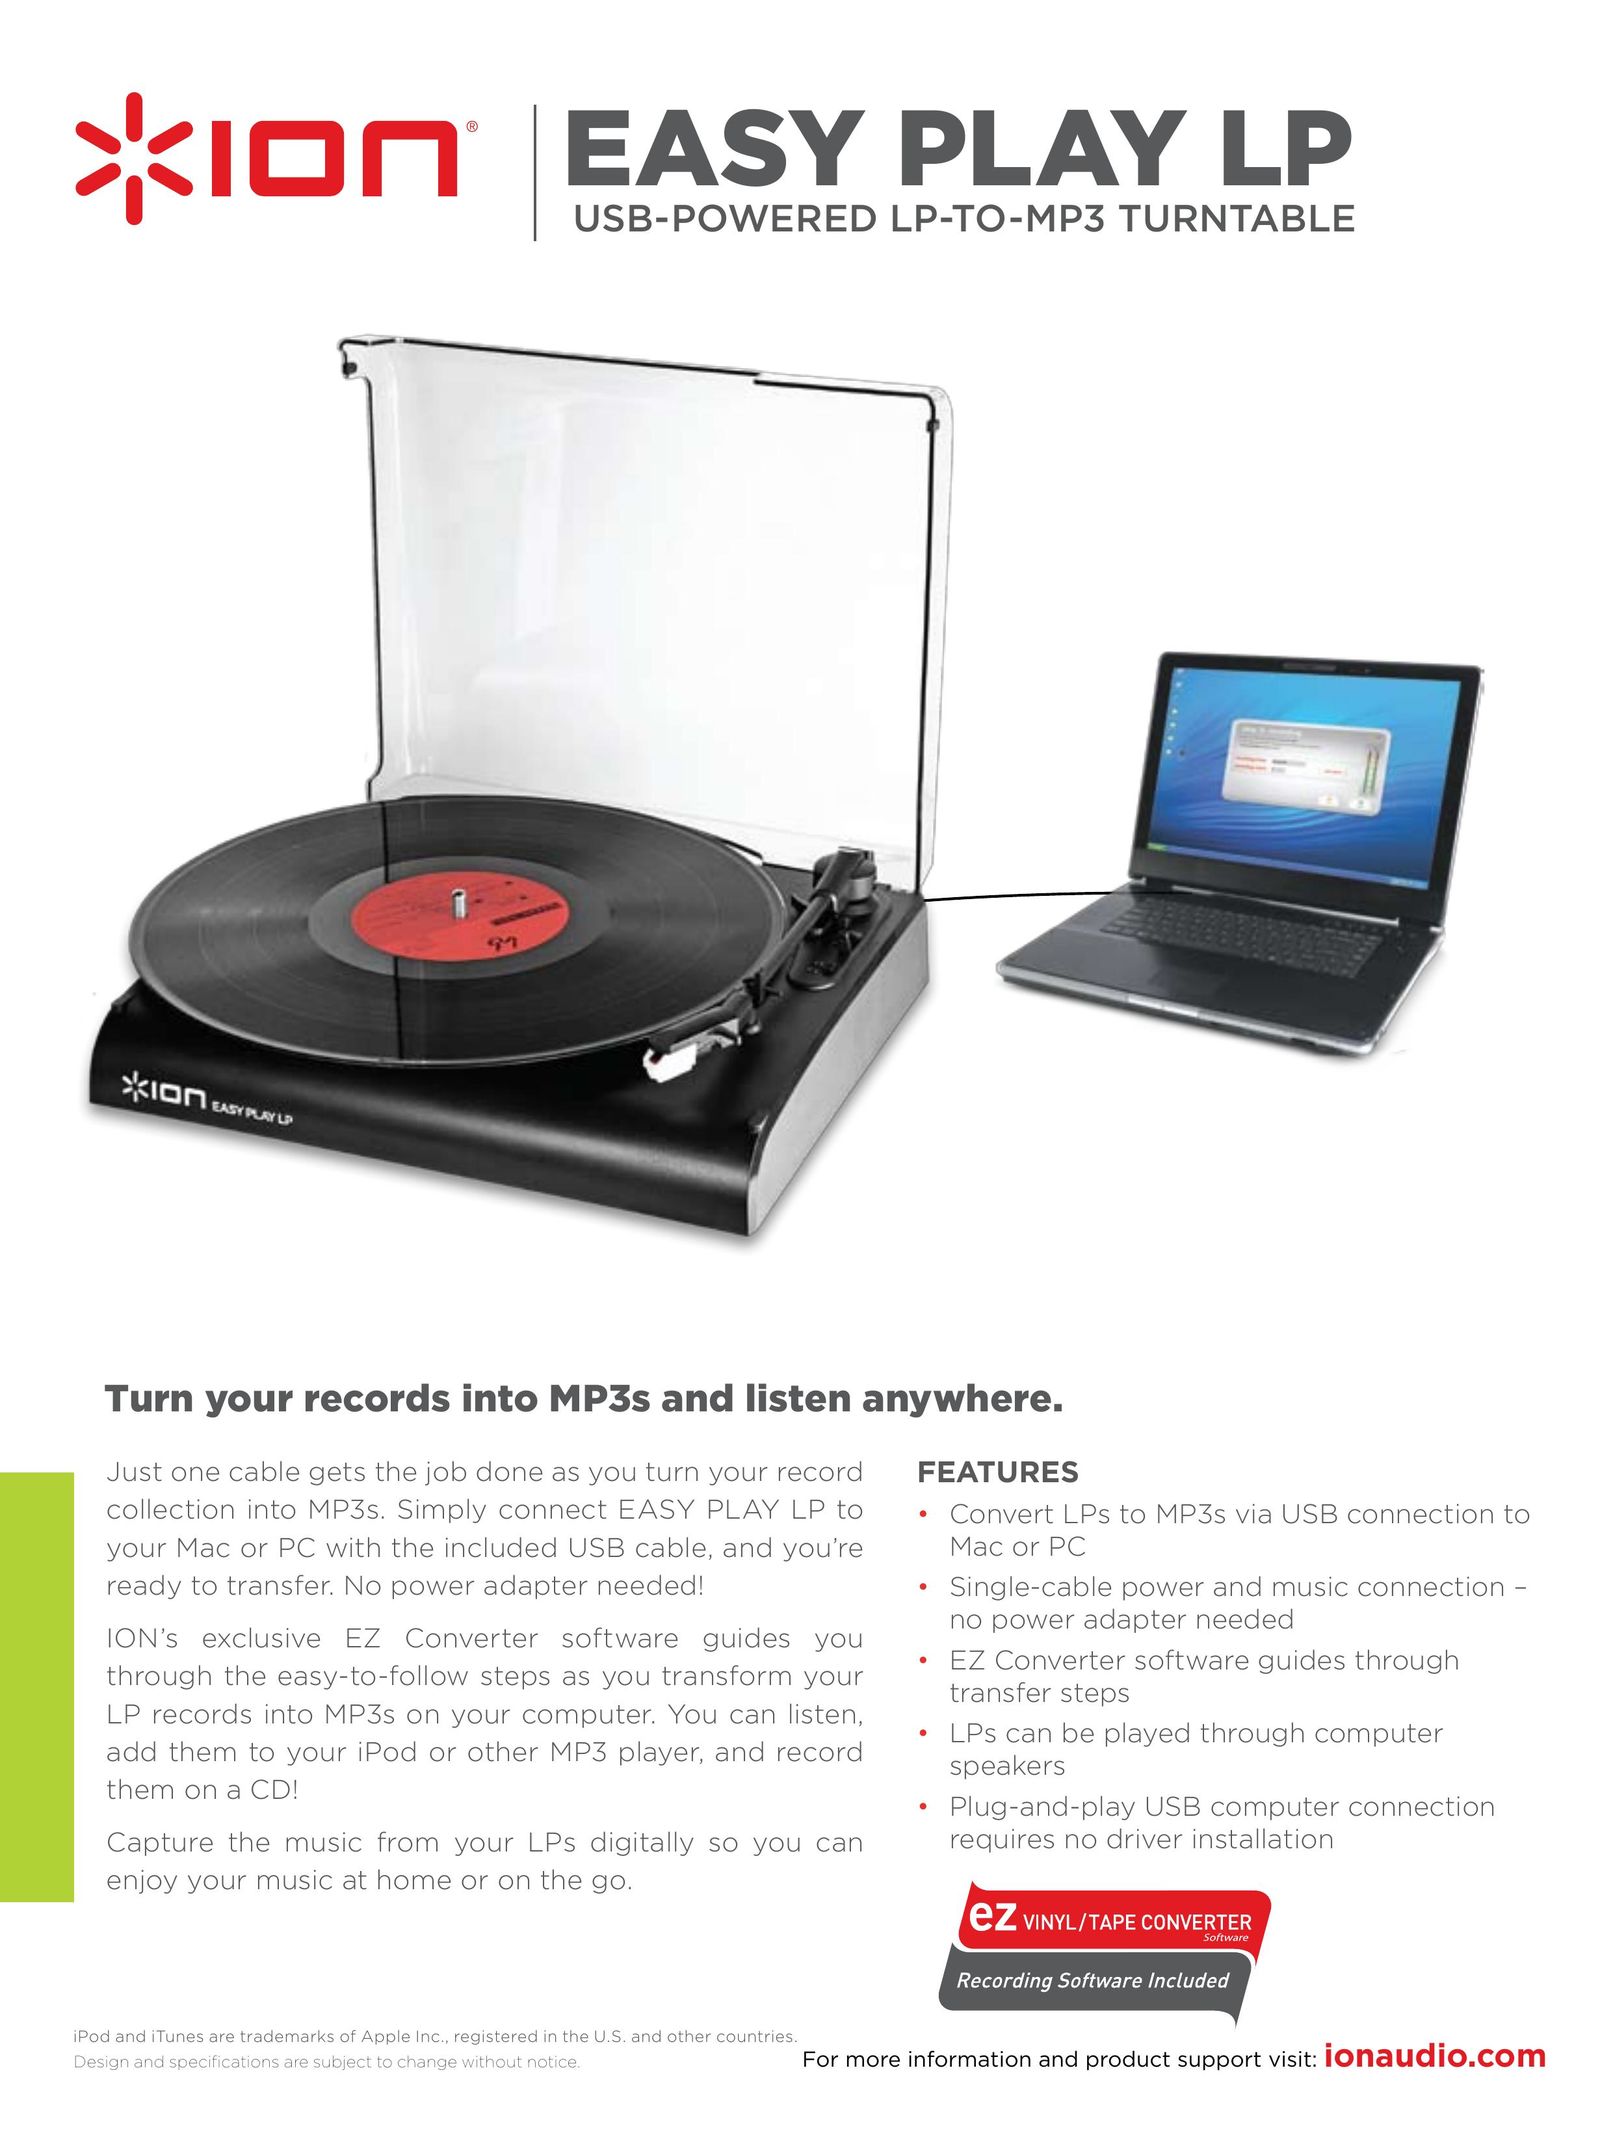 ION EASY PLAY LP Turntable User Manual